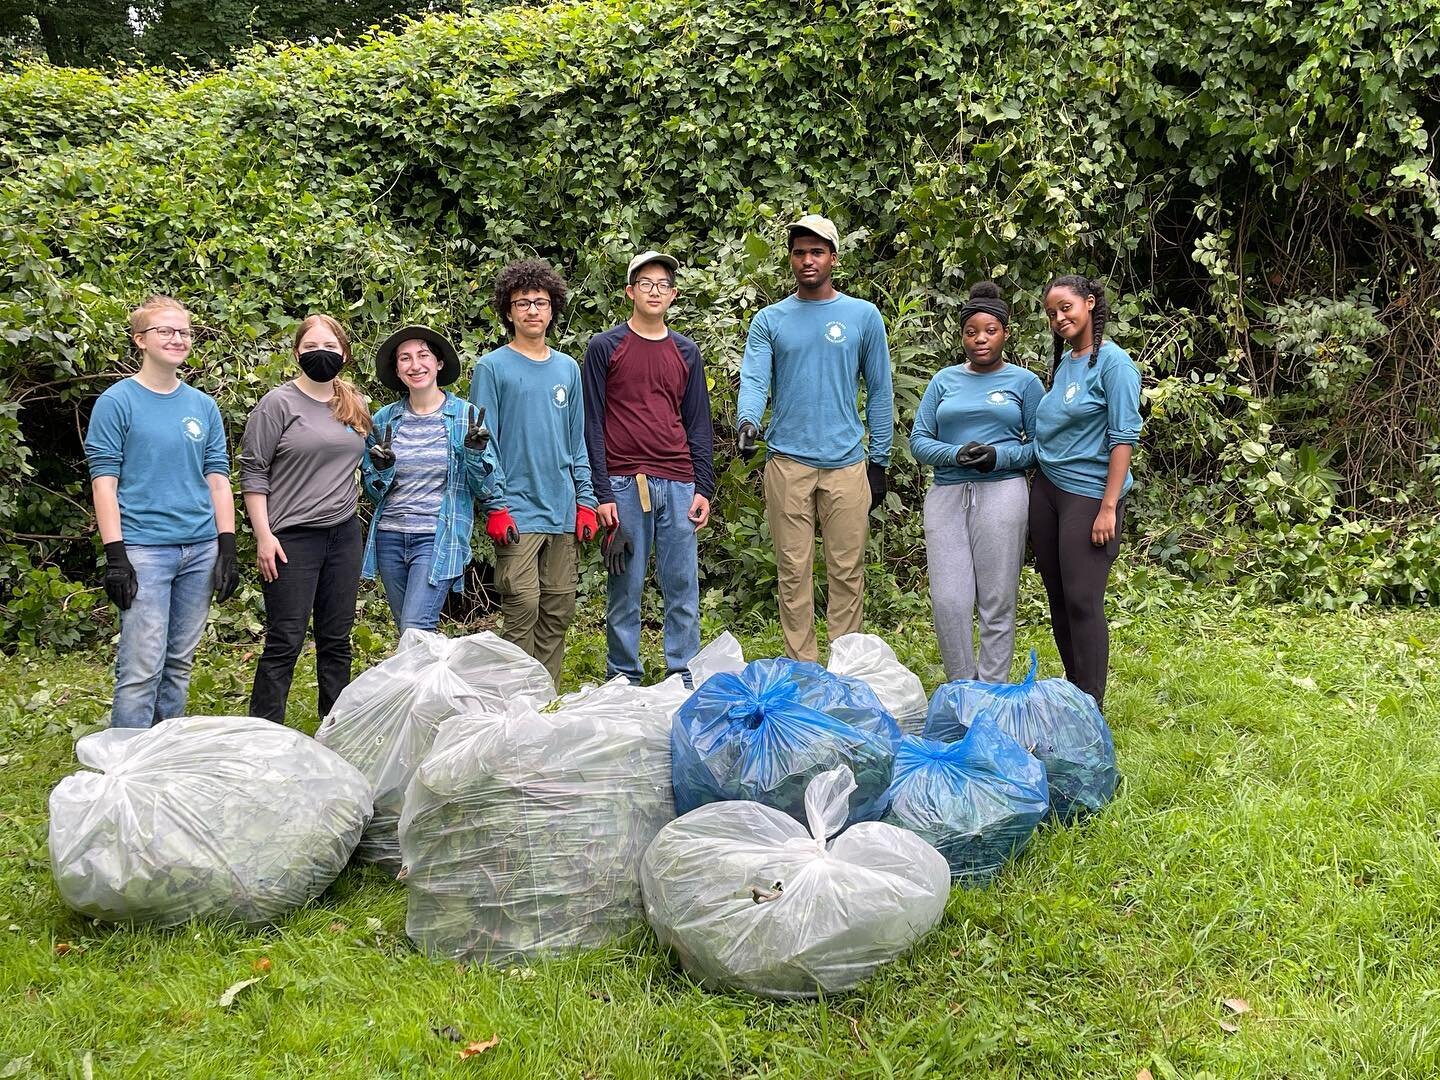 The MoCo crew has spent most of the mornings this week removing invasive plants from Boundary Bridge and Meadowbrook Local Park. 

So far this summer, we&rsquo;ve removed close to 75 bags of invasive plants to go along with our 250 pounds of litter. 